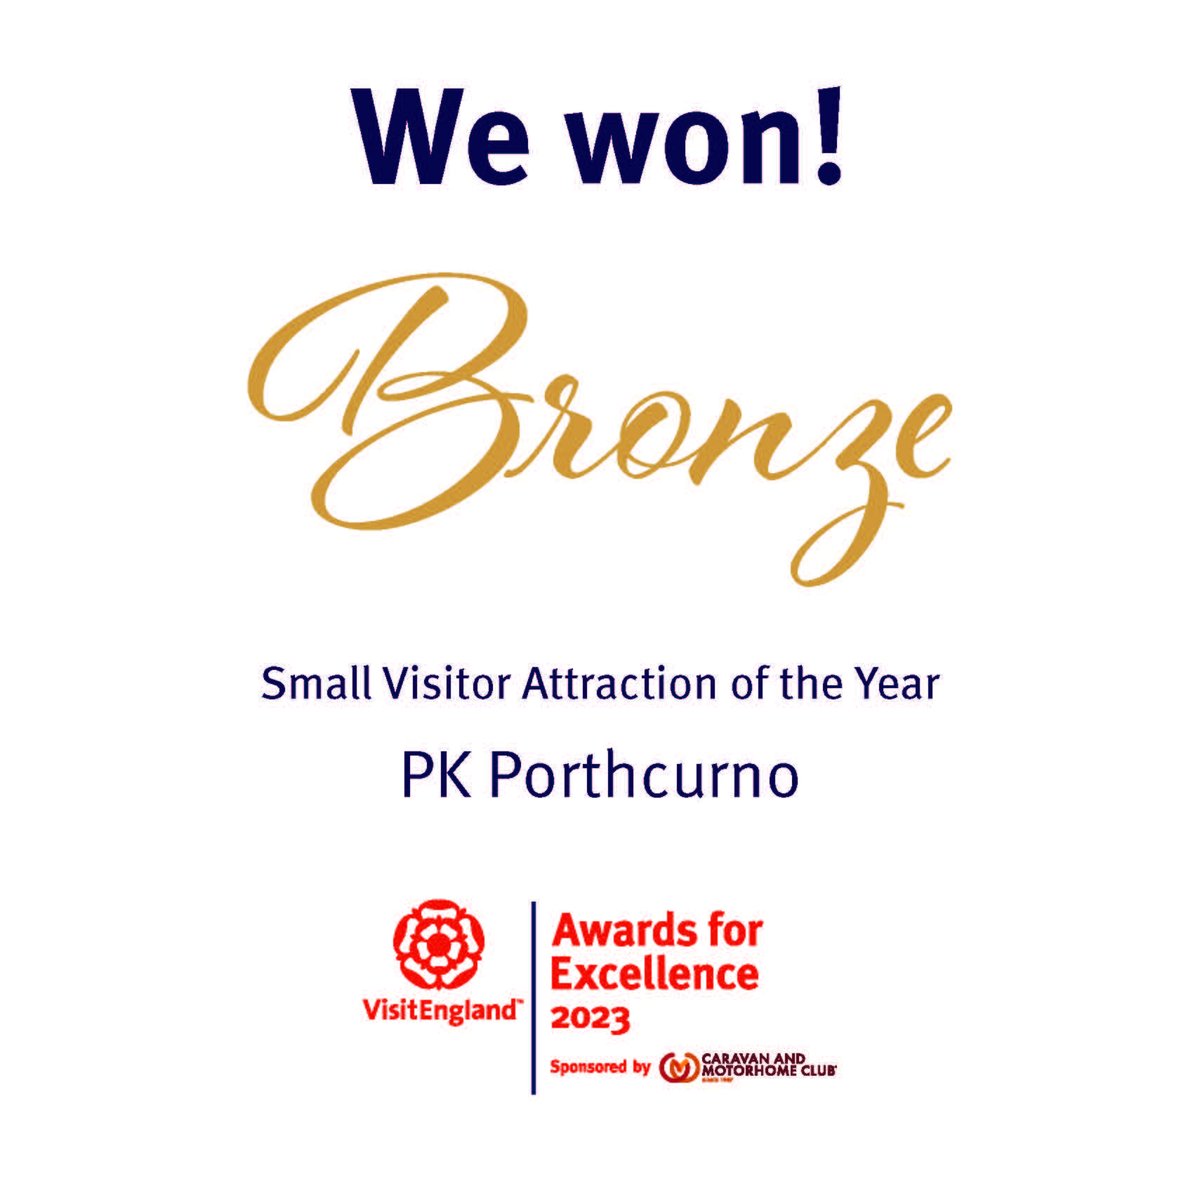 We are very proud to have won bronze at national level for #SmallVisitorAttractionoftheYear at the @VisitEngland #VEAwards23 last night. Thank you all for a great event 🙏

@swtourismawards @CornwallTA @VisitEnglandBiz